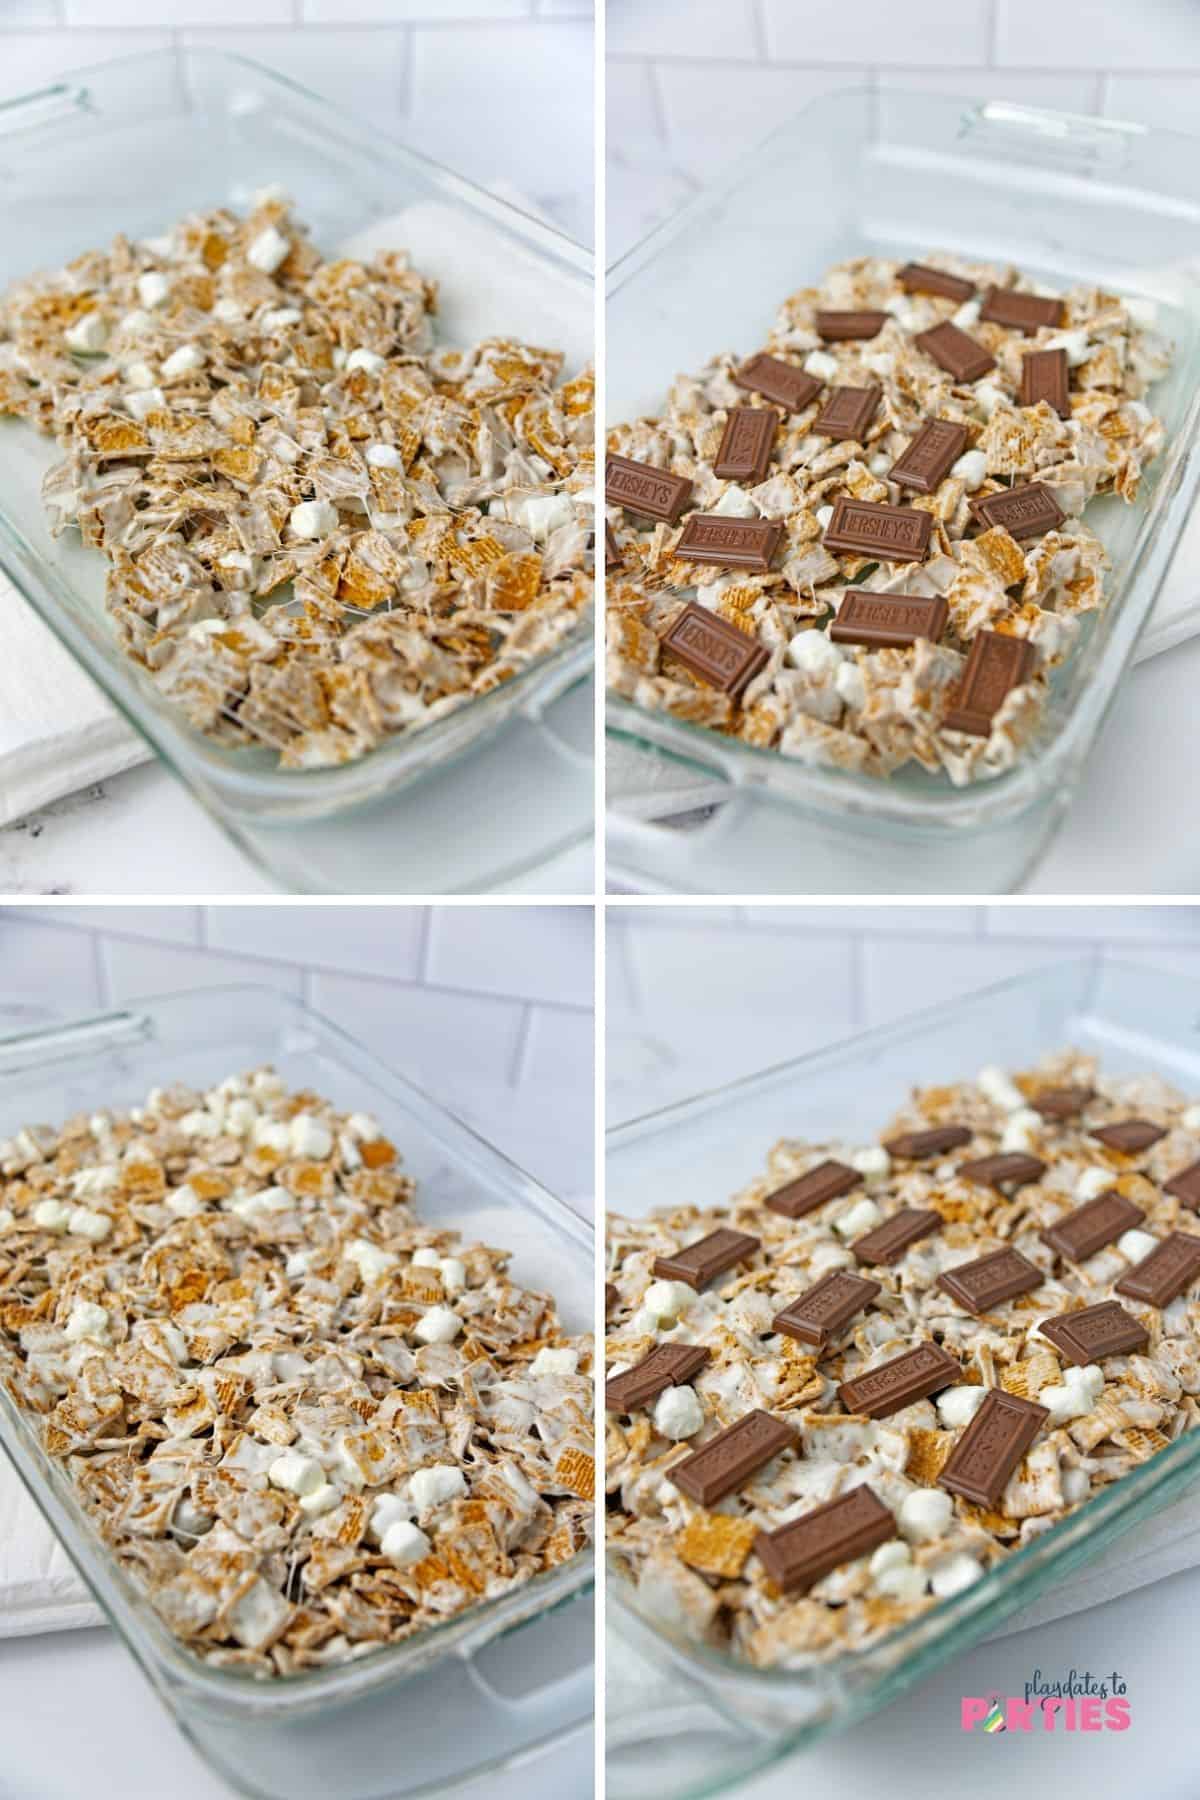 How to Make S'mores bars steps 4-7.